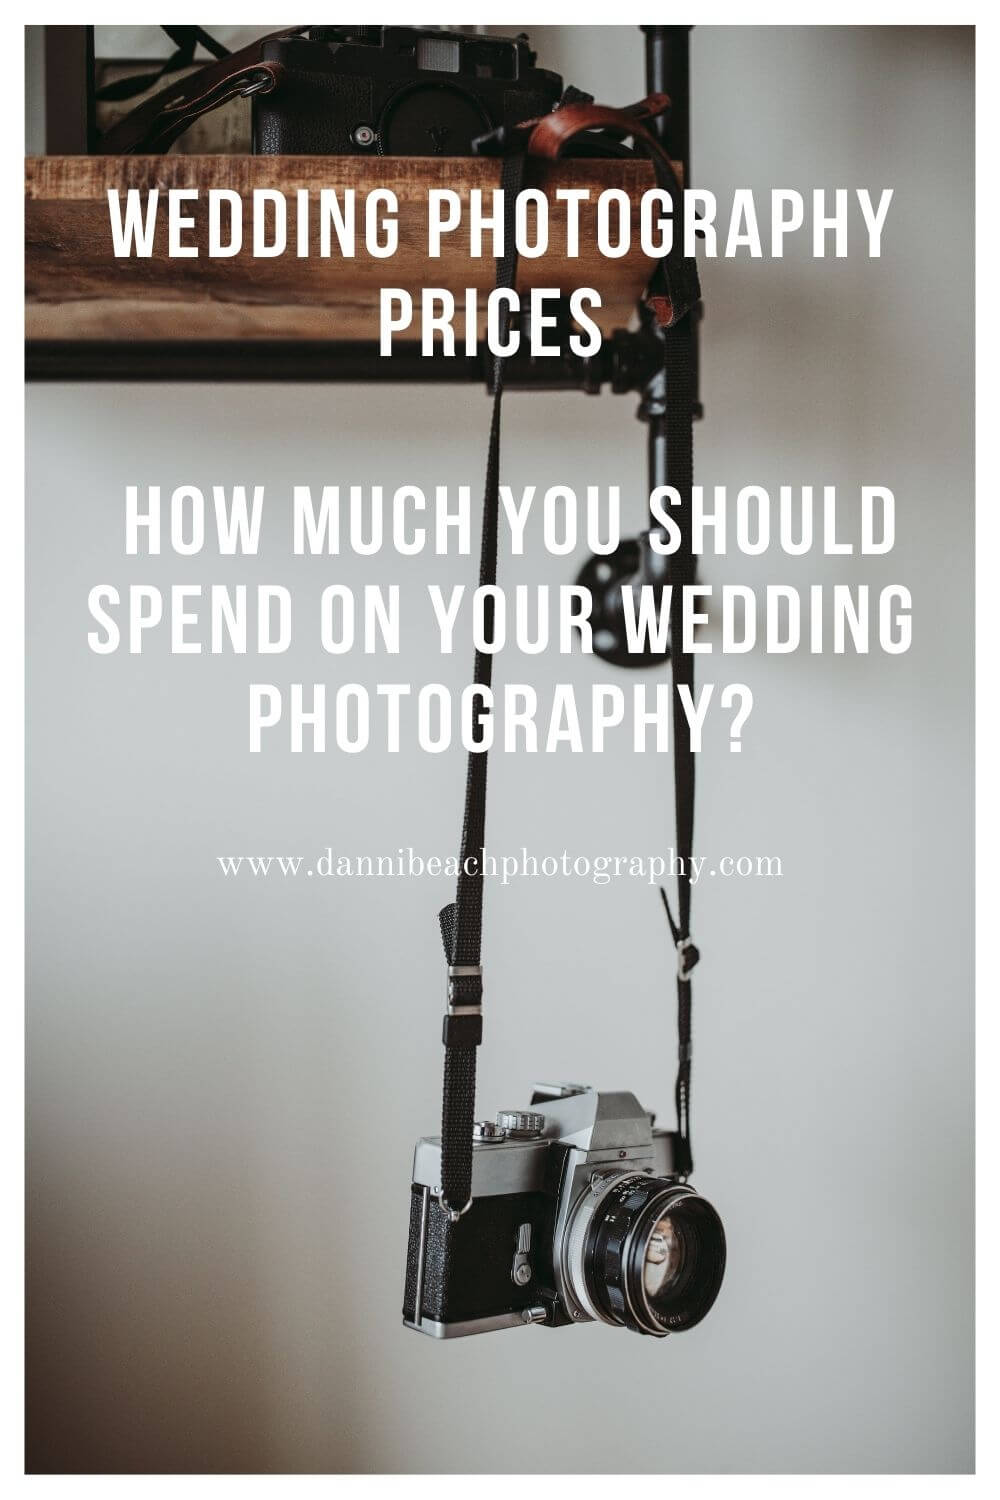 How much should you pay for wedding photography